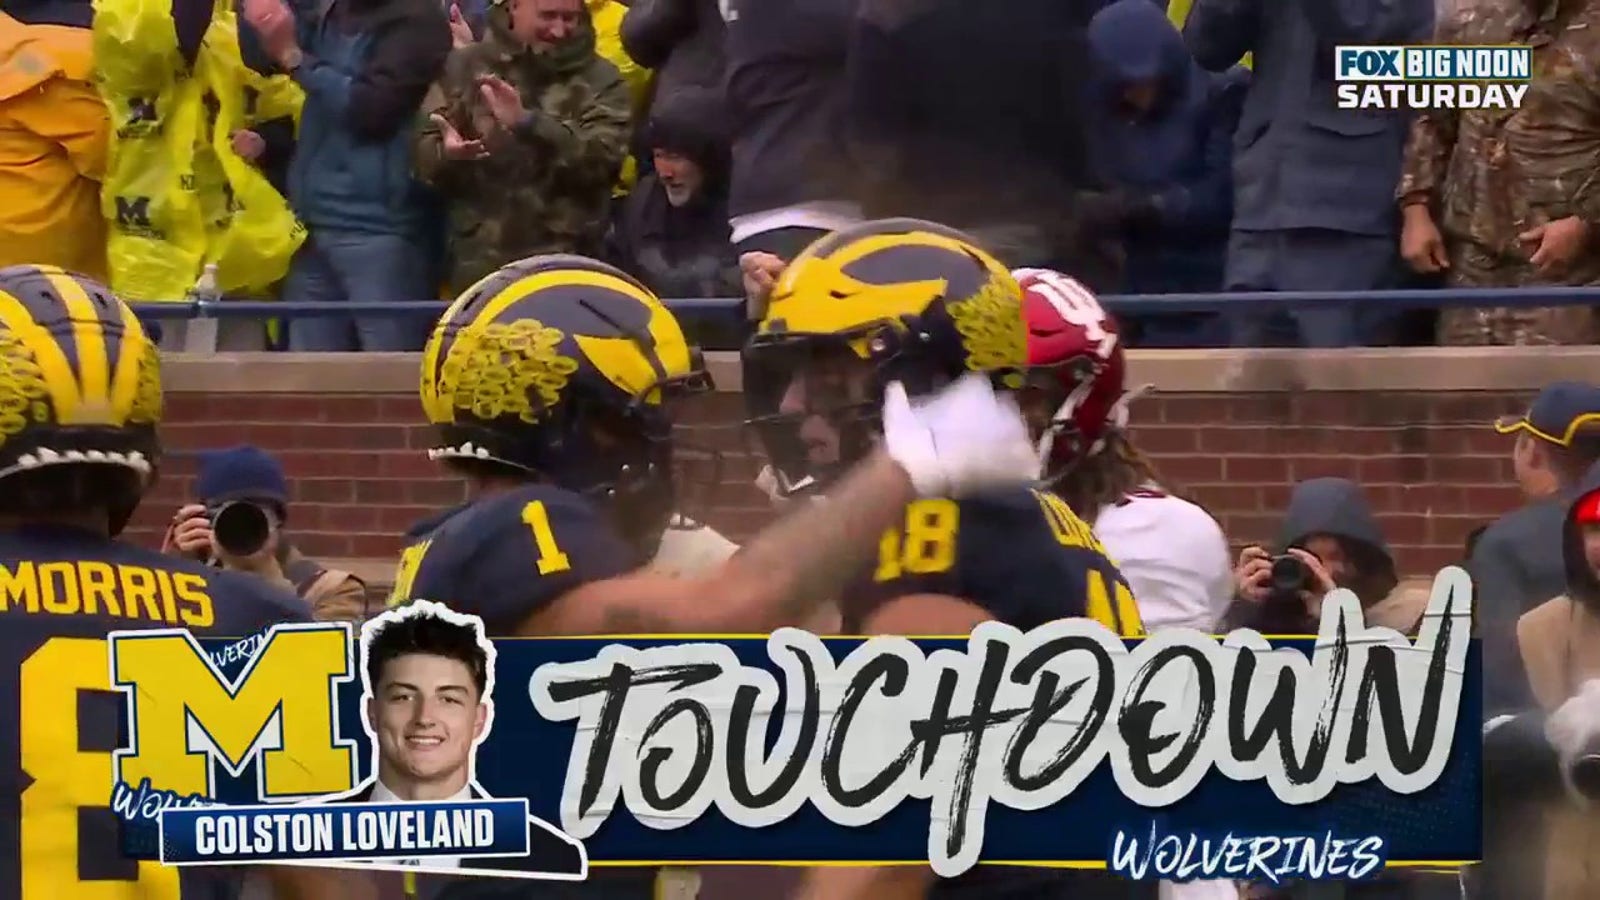 J.J. McCarthy links up with Colston Loveland for a 54-yard TD to extend Michigan's lead vs. Indiana